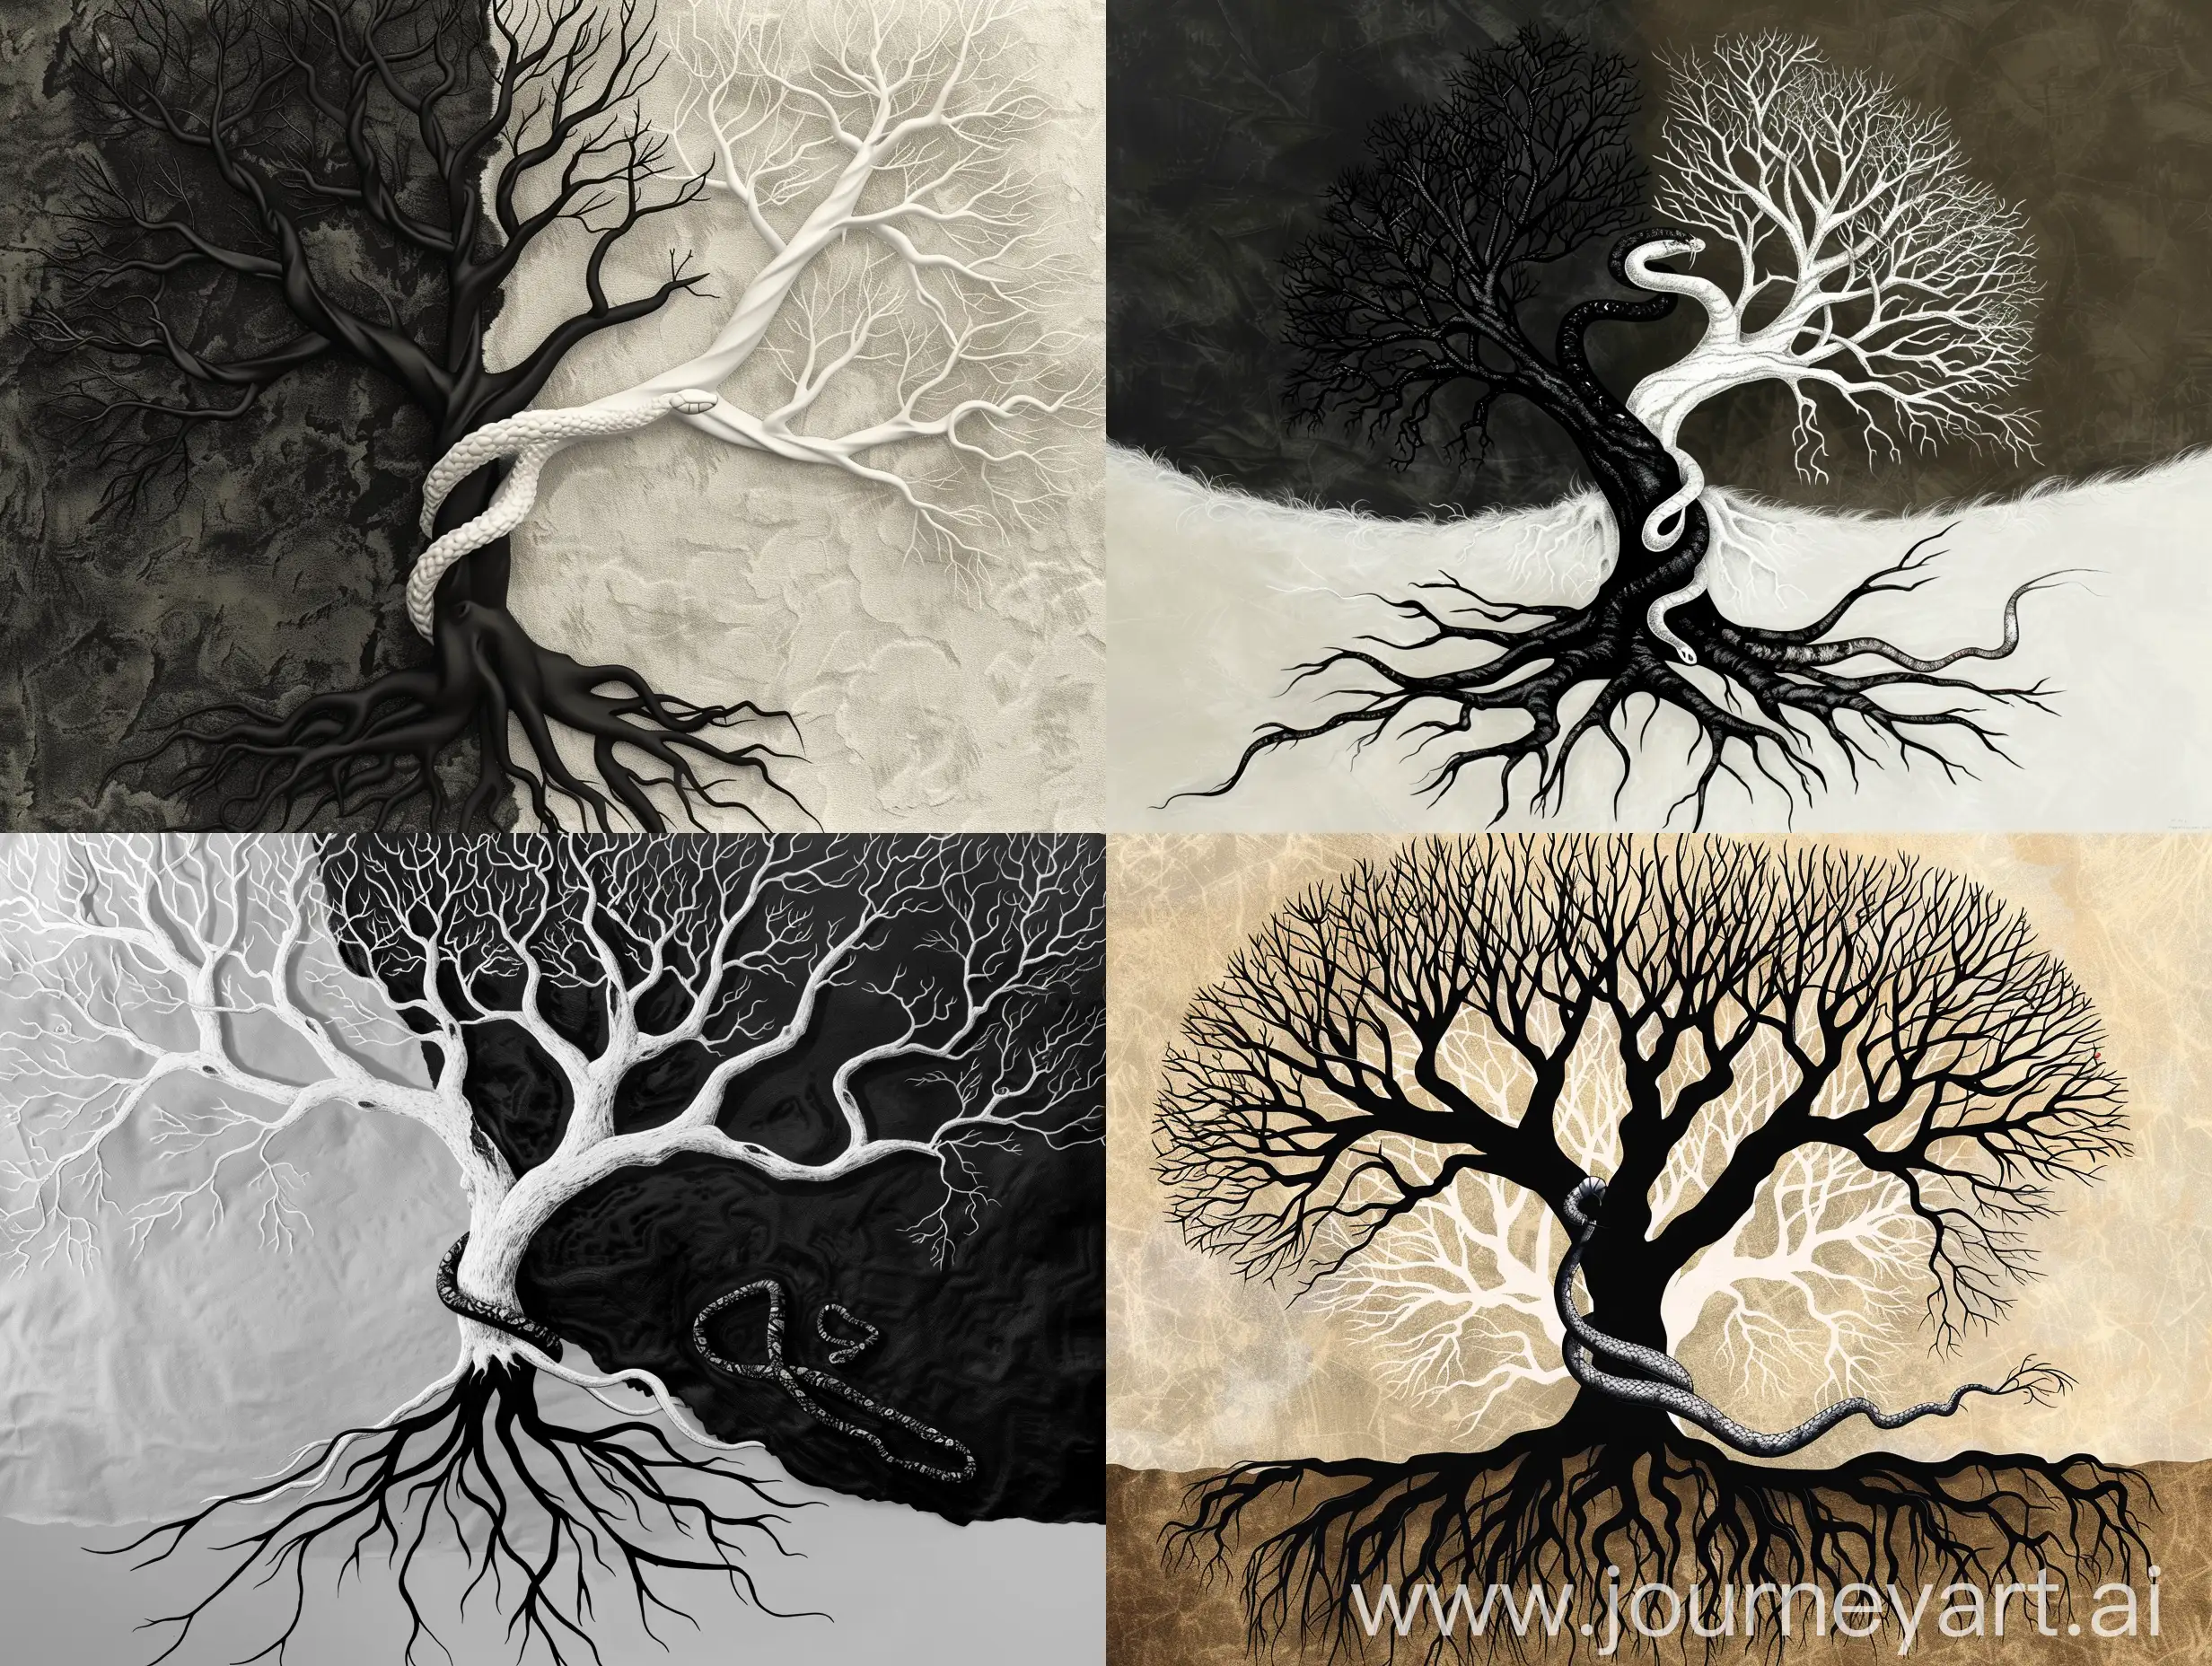 Serpent-Wrapped-Monochrome-Tree-Symbolic-Representation-of-Conscious-and-Unconscious-Mind